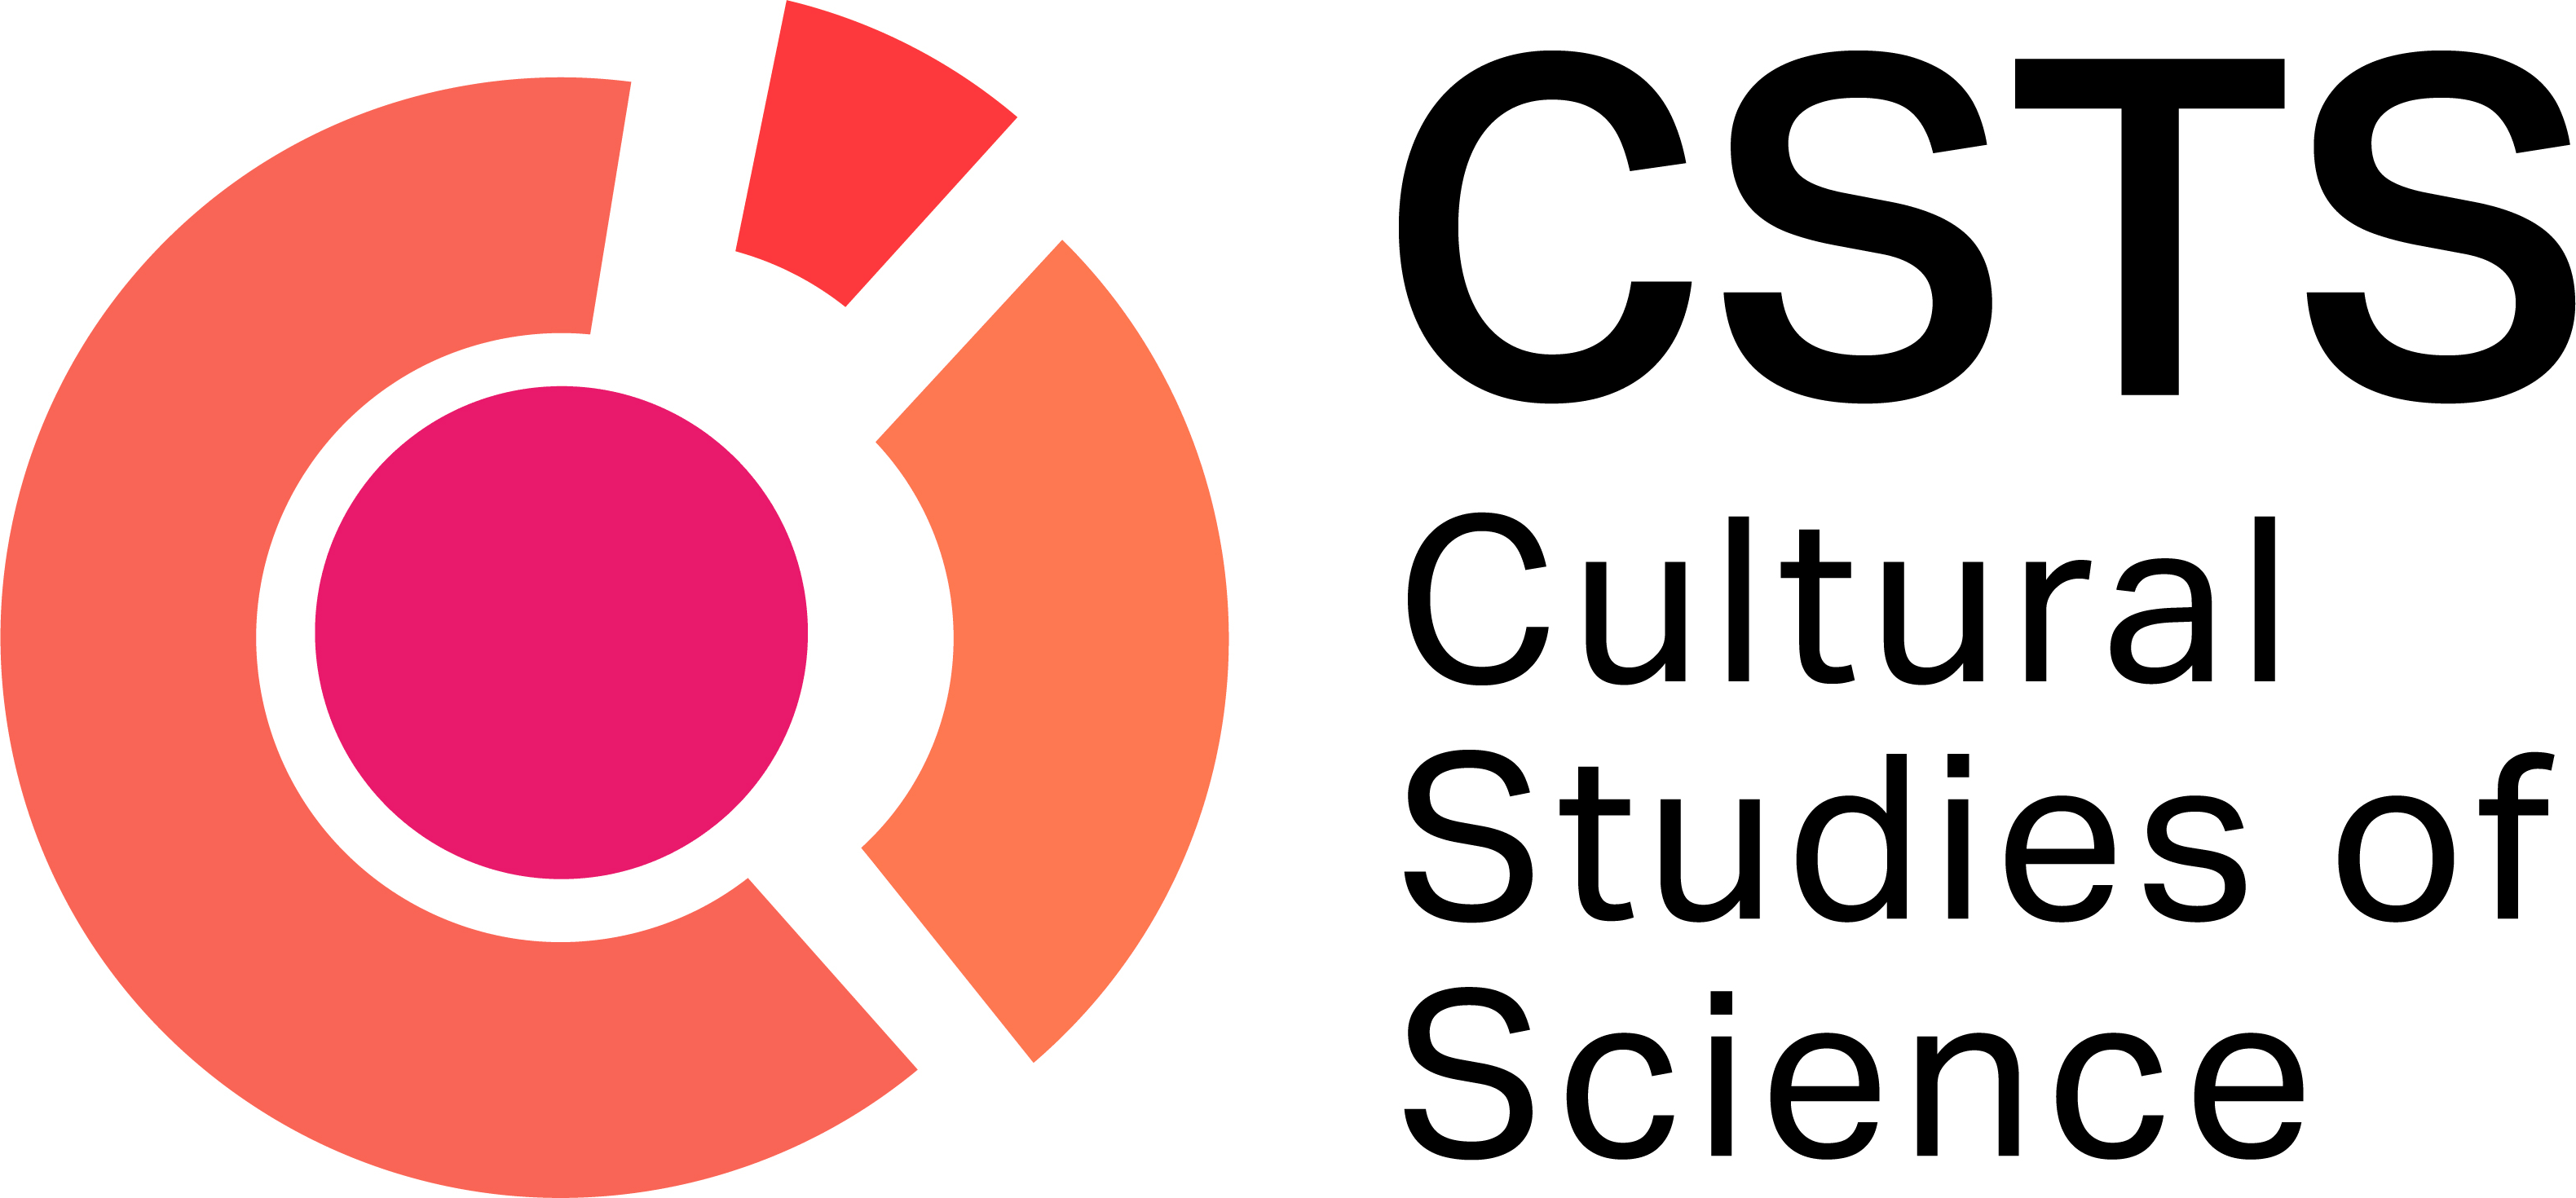 Enlarged view: The CSTS logo